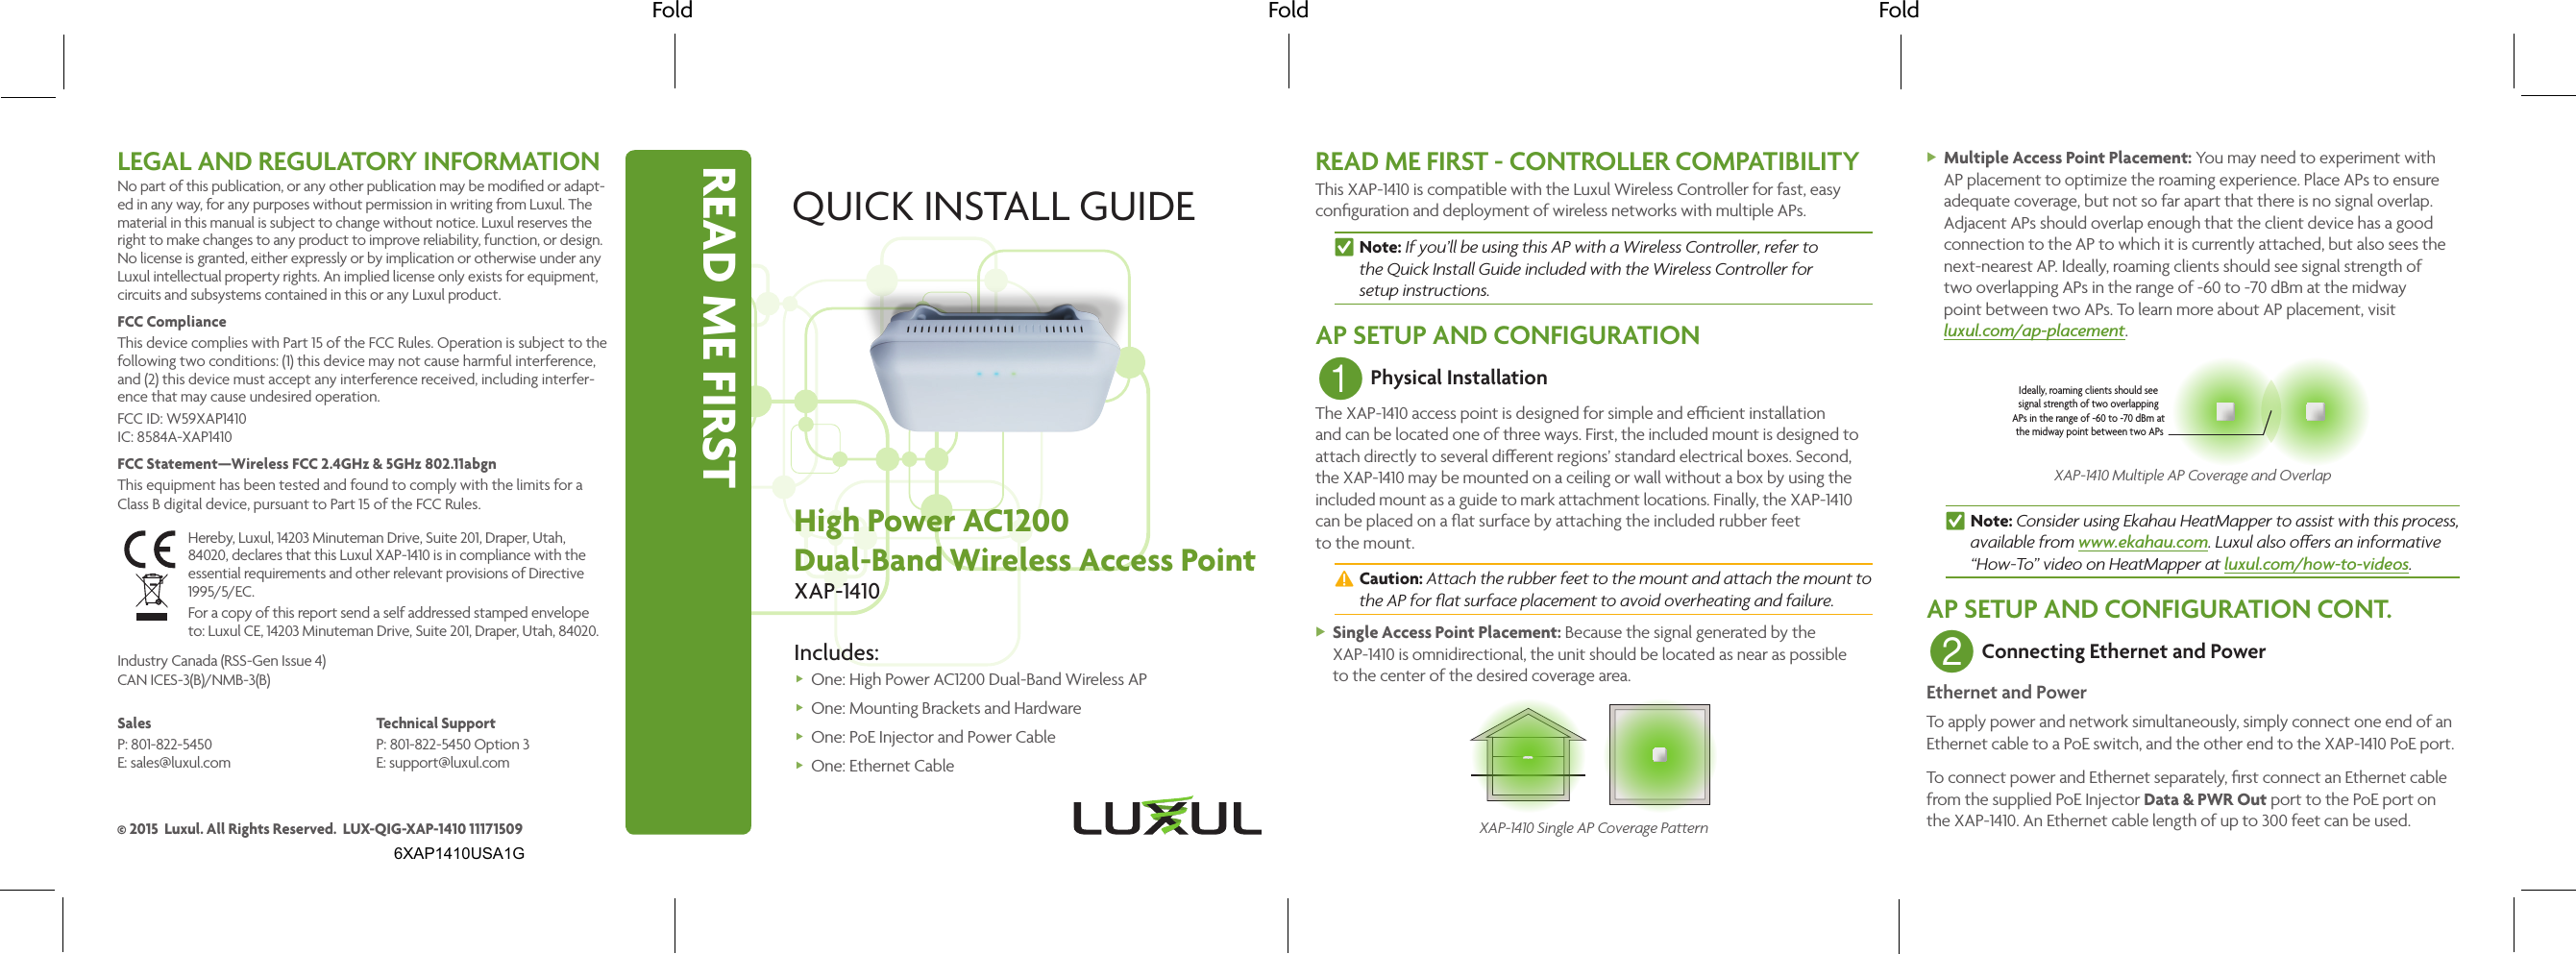 READ ME FIRSTFold Fold FoldQUICK INSTALL GUIDEHigh Power AC1200Dual-Band Wireless Access PointXAP-1410Includes: One: High Power AC1200 Dual-Band Wireless AP One: Mounting Brackets  and Hardware One: PoE Injector and  Power Cable One: Ethernet CableREAD ME FIRST - CONTROLLER COMPATIBILITYThis XAP-1410 is compatible with the Luxul Wireless Controller for fast, easy conﬁguration and deployment of wireless networks with multiple APs. nNote: If you’ll be using this AP with a Wireless Controller, refer to  the Quick Install Guide included with the Wireless Controller for  setup instructions.AP SETUP AND CONFIGURATION1 Physical InstallationThe XAP-1410 access point is designed for simple and ecient installation and can be located one of three ways. First, the included mount is designed to attach directly to several dierent regions’ standard electrical boxes. Second, the XAP-1410 may be mounted on a ceiling or wall without a box by using the included mount as a guide to mark attachment locations. Finally, the XAP-1410 can be placed on a ﬂat surface by attaching the included rubber feet to the mount. cCaution: Attach the rubber feet to the mount and attach the mount to the AP for ﬂat surface placement to avoid overheating and failure. XSingle Access Point Placement: Because the signal generated by the XAP-1410 is omnidirectional, the unit should be located as near as possible to the center of the desired coverage area.XAP-1410 Single AP Coverage Pattern XMultiple Access Point Placement: You may need to experiment with AP placement to optimize the roaming experience. Place APs to ensure adequate coverage, but not so far apart that there is no signal overlap. Adjacent APs should overlap enough that the client device has a good connection to the AP to which it is currently attached, but also sees the next-nearest AP. Ideally, roaming clients should see signal strength of  two overlapping APs in the range of -60 to -70 dBm at the midway  point between two APs. To learn more about AP placement, visit  luxul.com/ap-placement.Ideally, roaming clients should see signal strength of two overlapping APs in the range of -60 to -70 dBm at the midway point between two APsXAP-1410 Multiple AP Coverage and Overlap nNote: Consider using Ekahau HeatMapper to assist with this process, available from www.ekahau.com. Luxul also oers an informative “How-To” video on HeatMapper at luxul.com/how-to-videos.AP SETUP AND CONFIGURATION CONT.2 Connecting Ethernet and PowerEthernet and PowerTo apply power and network simultaneously, simply connect one end of an Ethernet cable to a PoE switch, and the other end to the XAP-1410 PoE port. To connect power and Ethernet separately, ﬁrst connect an Ethernet cable from the supplied PoE Injector Data &amp; PWR Out port to the PoE port on the XAP-1410. An Ethernet cable length of up to 300 feet can be used.LEGAL AND REGULATORY INFORMATIONNo part of this publication, or any other publication may be modiﬁed or adapt-ed in any way, for any purposes without permission in writing from Luxul. The material in this manual is subject to change without notice. Luxul reserves the right to make changes to any product to improve reliability, function, or design. No license is granted, either expressly or by implication or otherwise under any Luxul intellectual property rights. An implied license only exists for equipment, circuits and subsystems contained in this or any Luxul product. FCC ComplianceThis device complies with Part 15 of the FCC Rules. Operation is subject to the following two conditions: (1) this device may not cause harmful interference, and (2) this device must accept any interference received, including interfer-ence that may cause undesired operation.FCC ID: W59XAP1410 IC: 8584A-XAP1410FCC Statement—Wireless FCC 2.4GHz &amp; 5GHz 802.11abgnThis equipment has been tested and found to comply with the limits for a Class B digital device, pursuant to Part 15 of the FCC Rules. Hereby, Luxul, 14203 Minuteman Drive, Suite 201, Draper, Utah, 84020, declares that this Luxul XAP-1410 is in compliance with the essential requirements and other relevant provisions of Directive 1995/5/EC.For a copy of this report send a self addressed stamped envelope  to: Luxul CE, 14203 Minuteman Drive, Suite 201, Draper, Utah, 84020.Industry Canada (RSS-Gen Issue 4)CAN ICES-3(B)/NMB-3(B) SalesP: 801-822-5450 E: sales@luxul.comTechnical SupportP: 801-822-5450 Option 3 E: support@luxul.com© 2015  Luxul. All Rights Reserved.  LUX-QIG-XAP-1410 111715096XAP1410USA1G